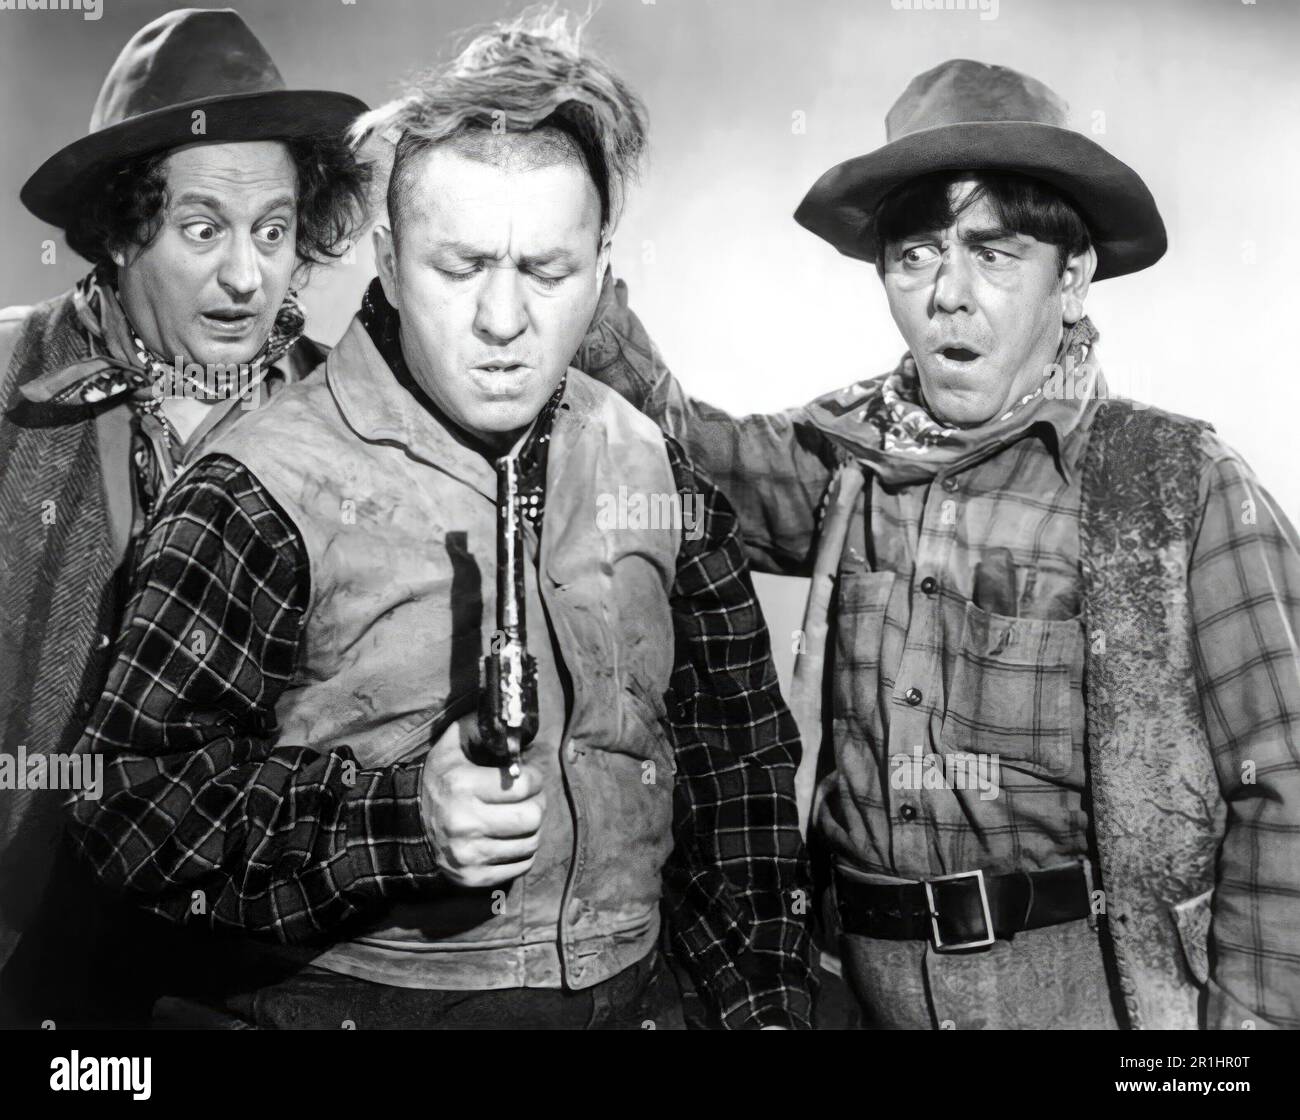 MOE HOWARD, LARRY FINE, CURLY HOWARD and THE THREE STOOGES in THE THREE TROUBLEDOERS (1946), directed by EDWARD BERNDS. Credit: COLUMBIA PICTURES / Album Stock Photo